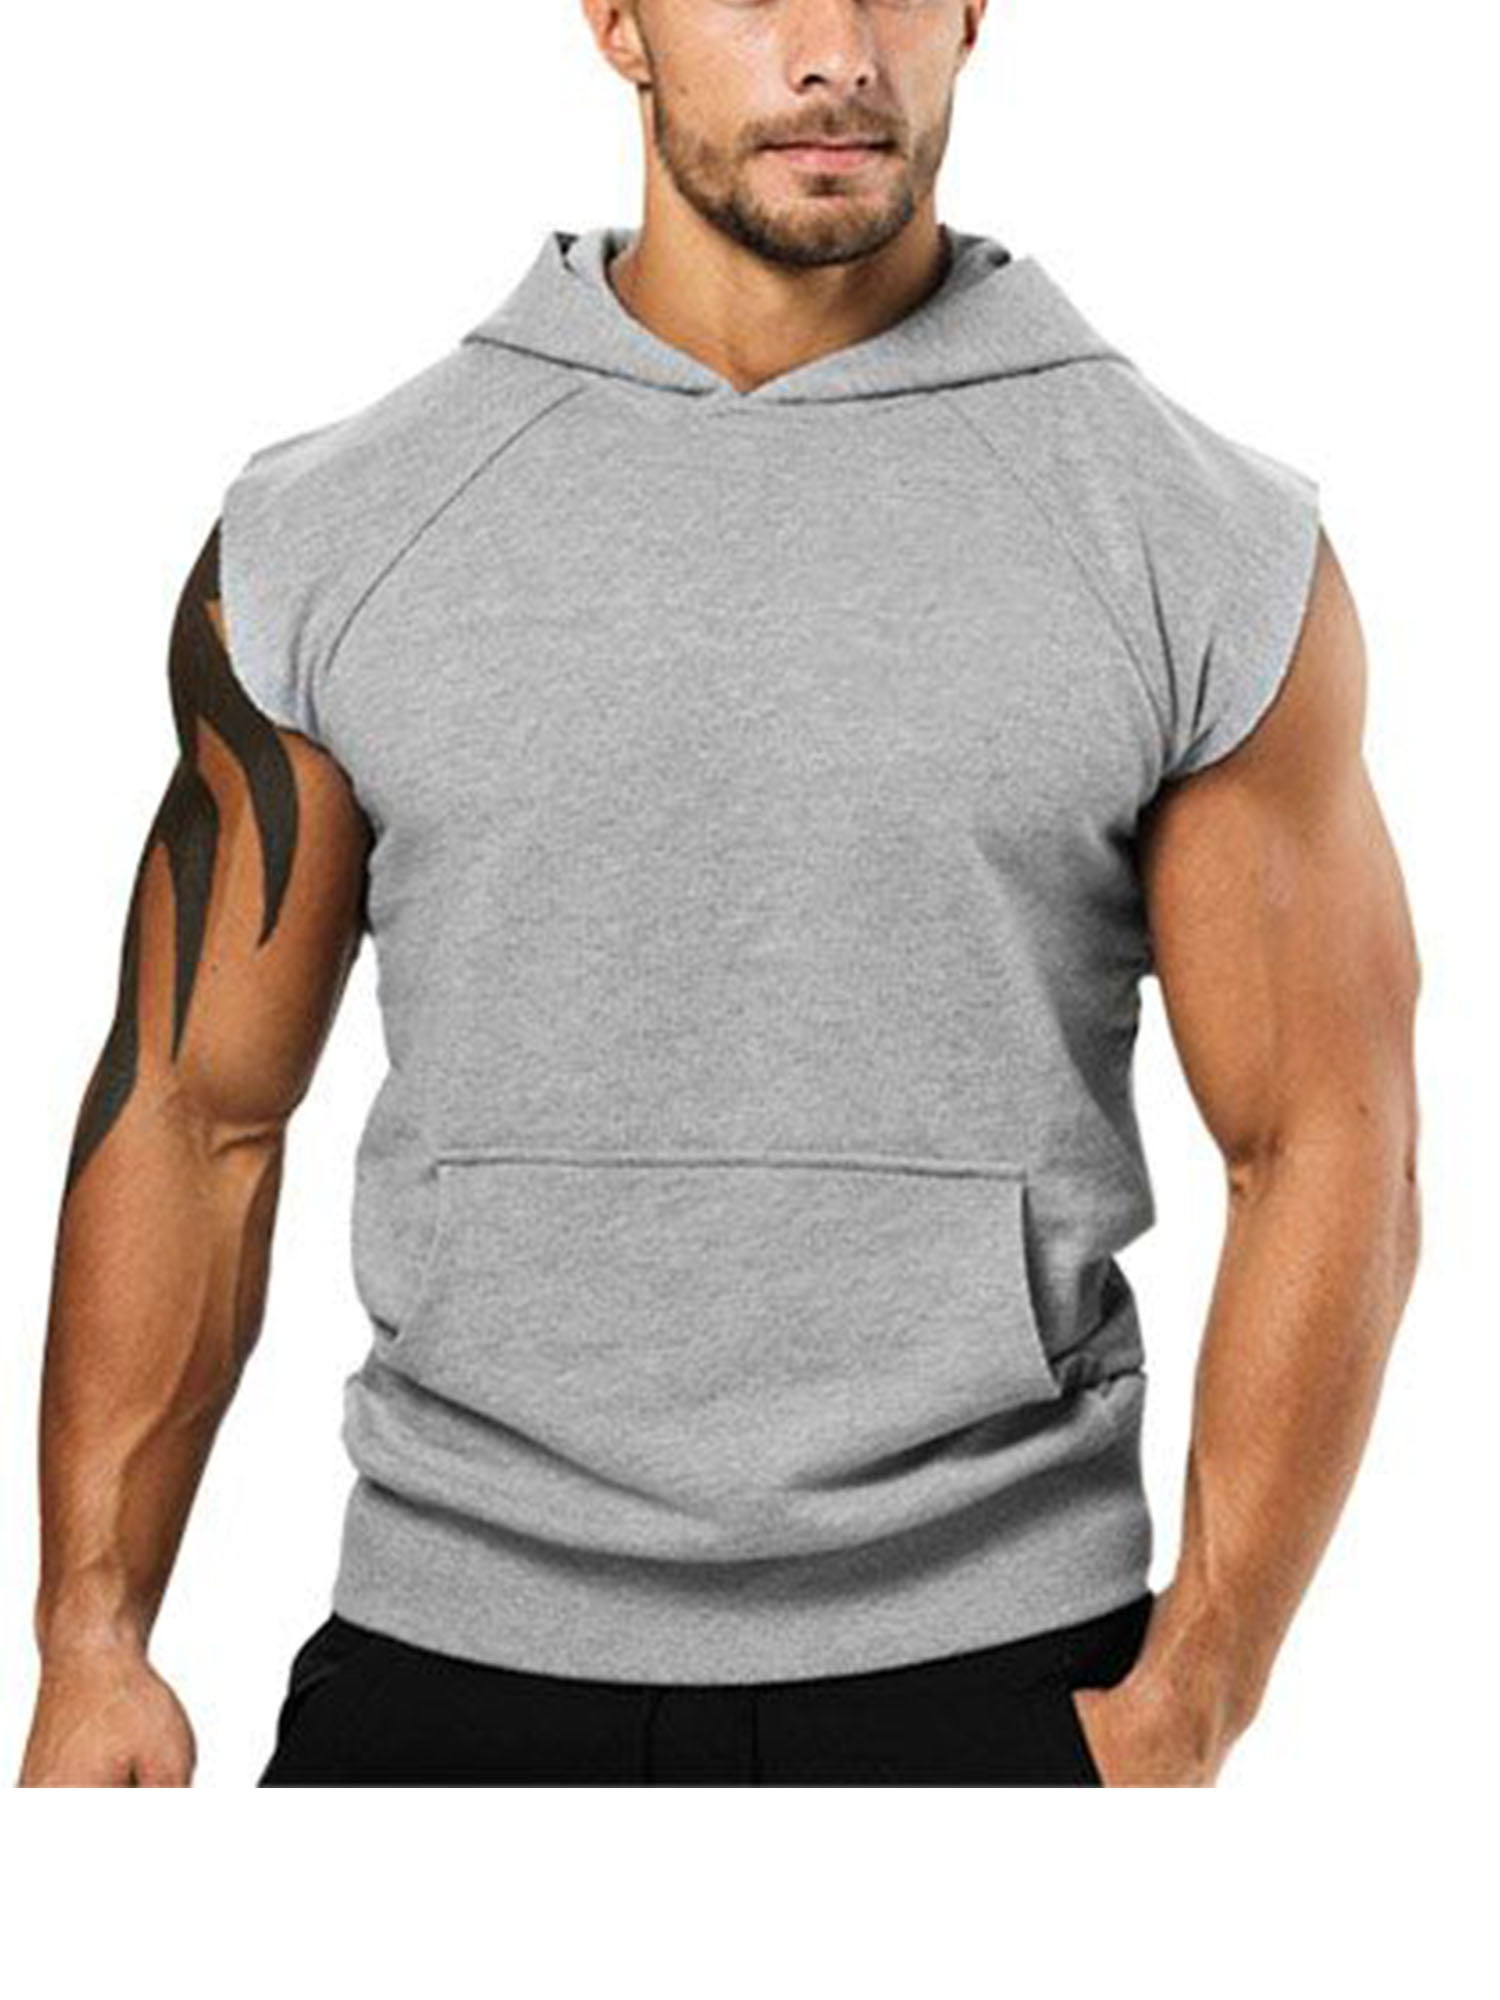 Men's Tank Tops Workout Muscle Gym Bodybuilding Shirts Sleeveless Muscle Tee